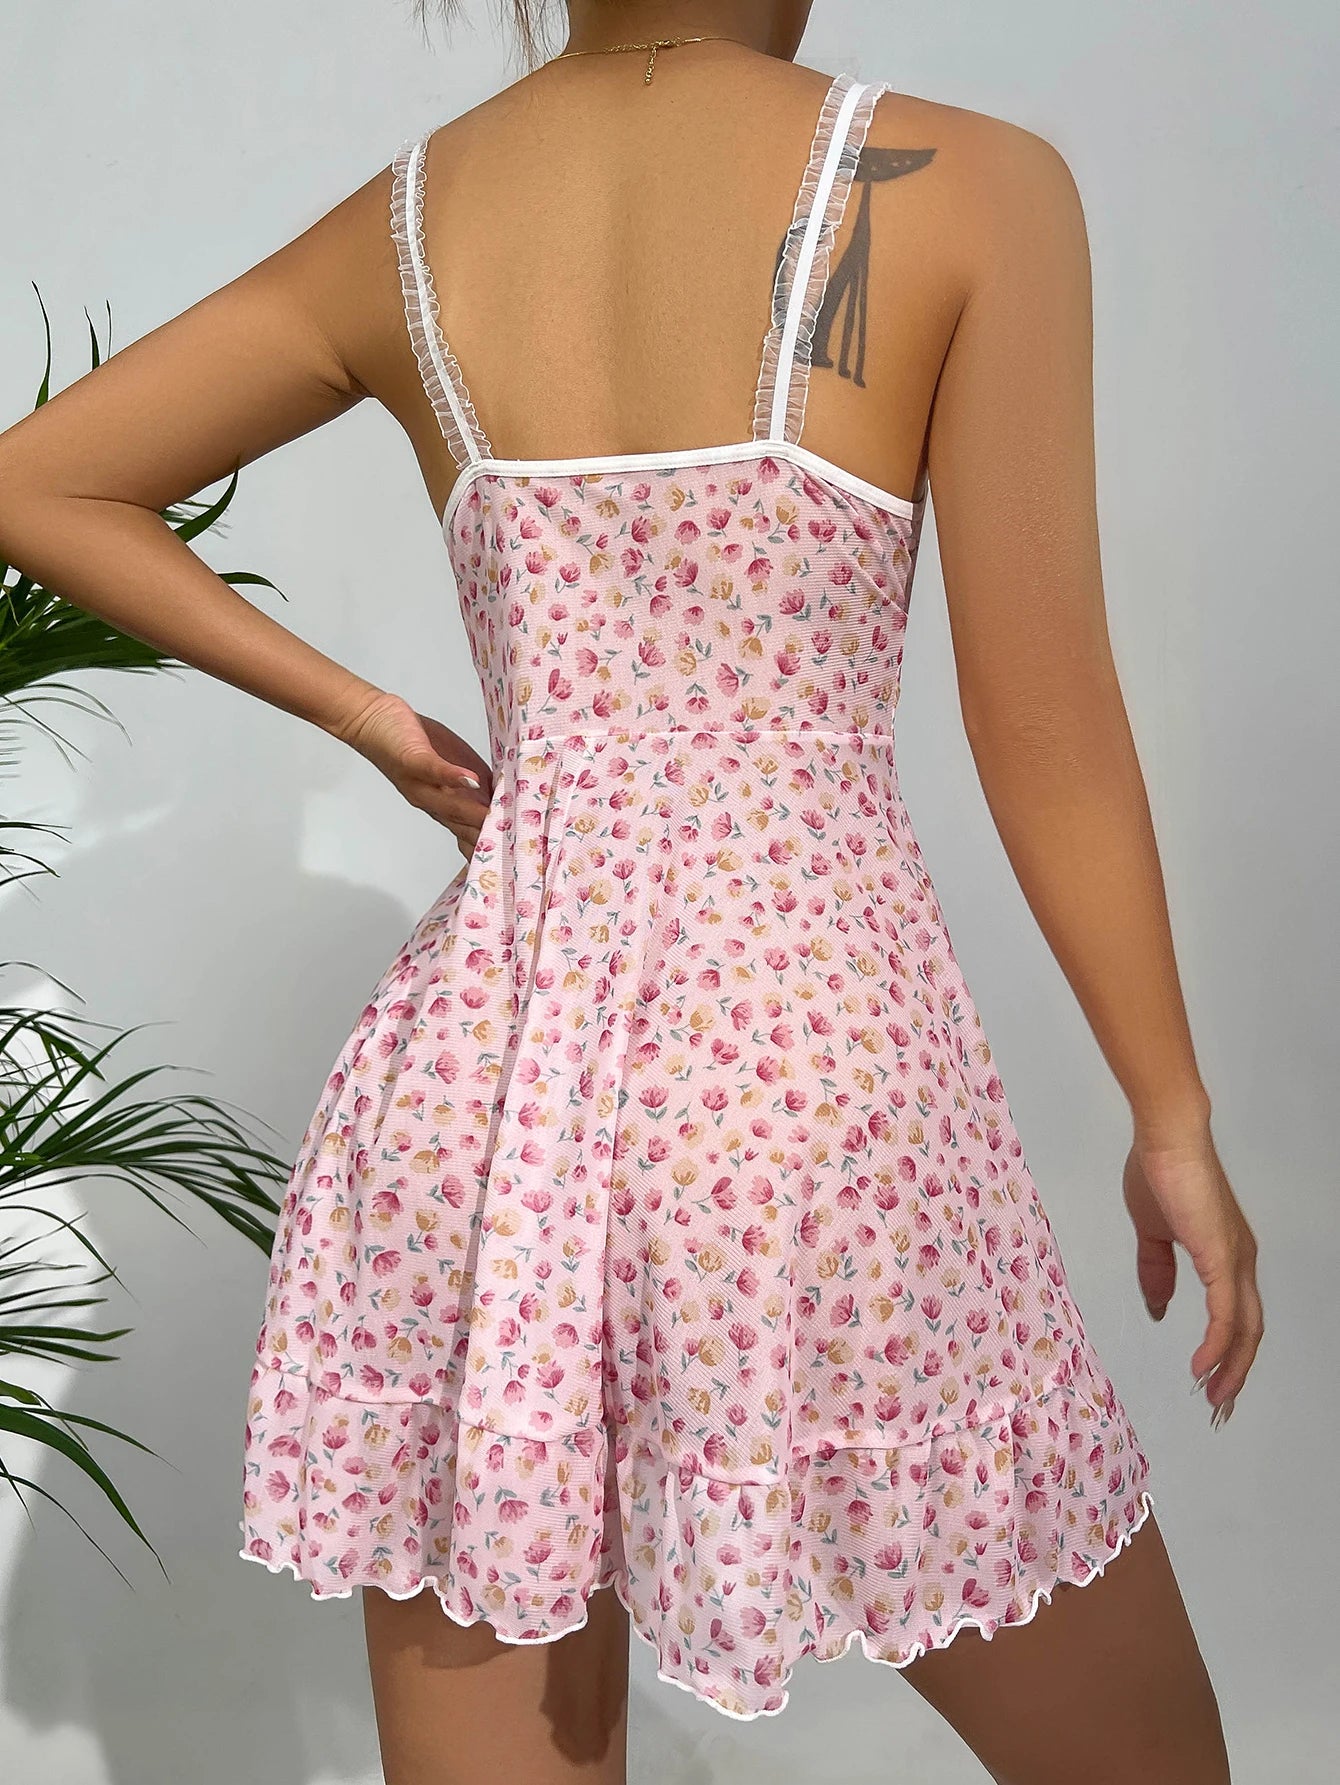 Summer Pink Dress Floral Printed Lace for Women Home V-neck with Strap Camisole Nightdress